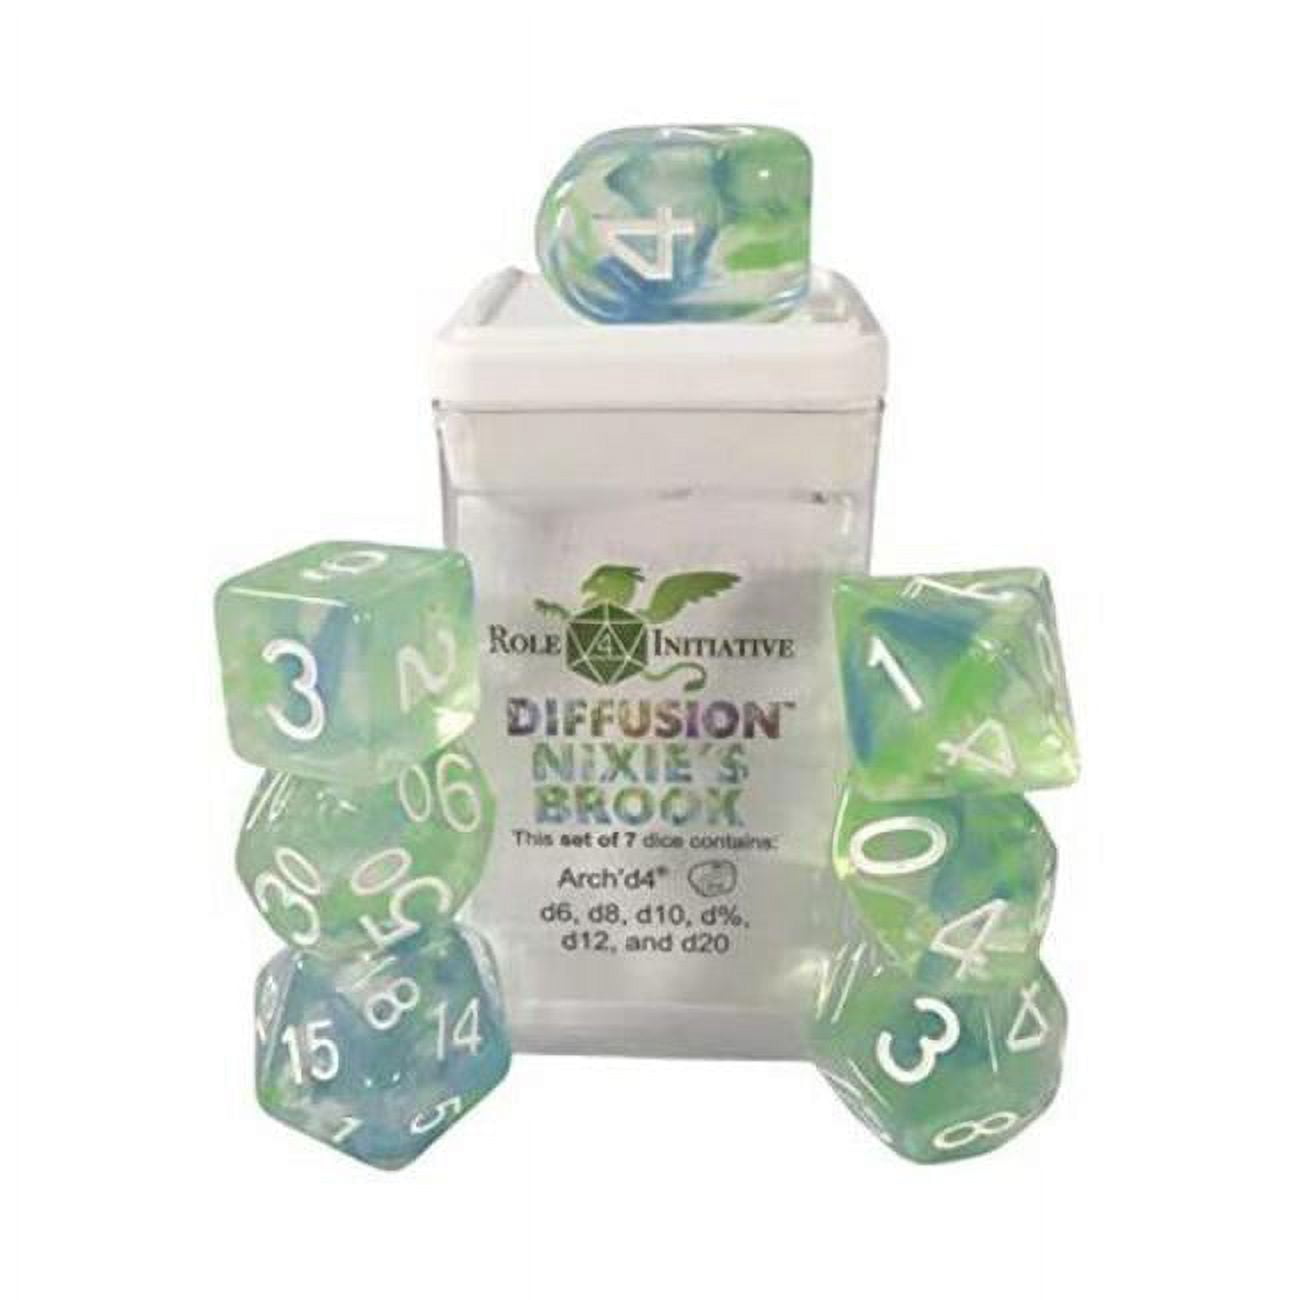 Picture of Role 4 Initiative R4I50533-7C-S Diffusion Nixies Brook SPR Dice, Set of 7